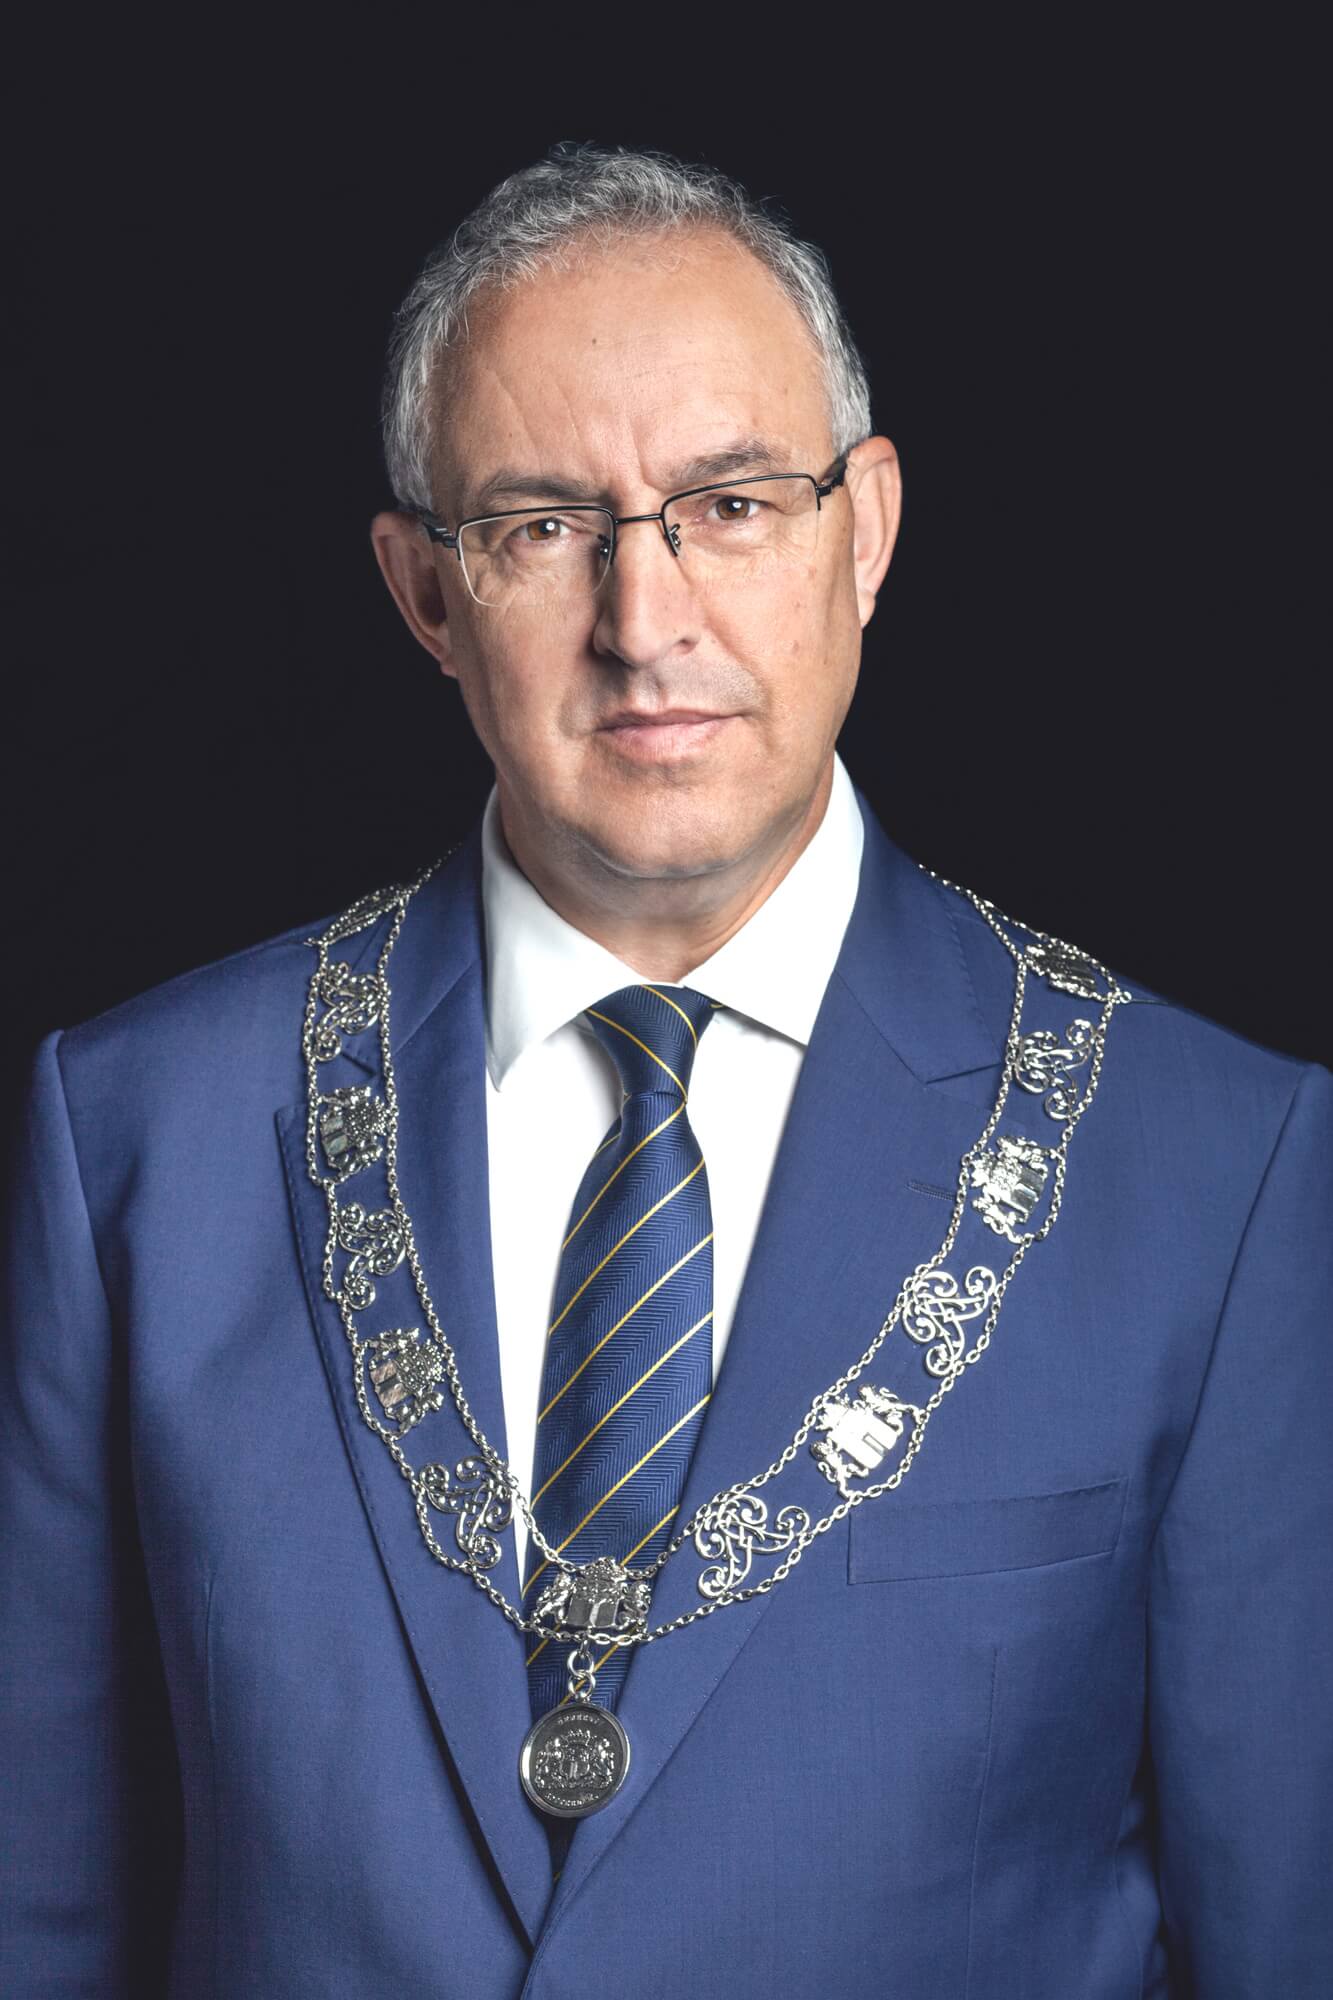 Rotterdam Mayor Ahmed Aboutaleb. Photo by Marc Nolten.